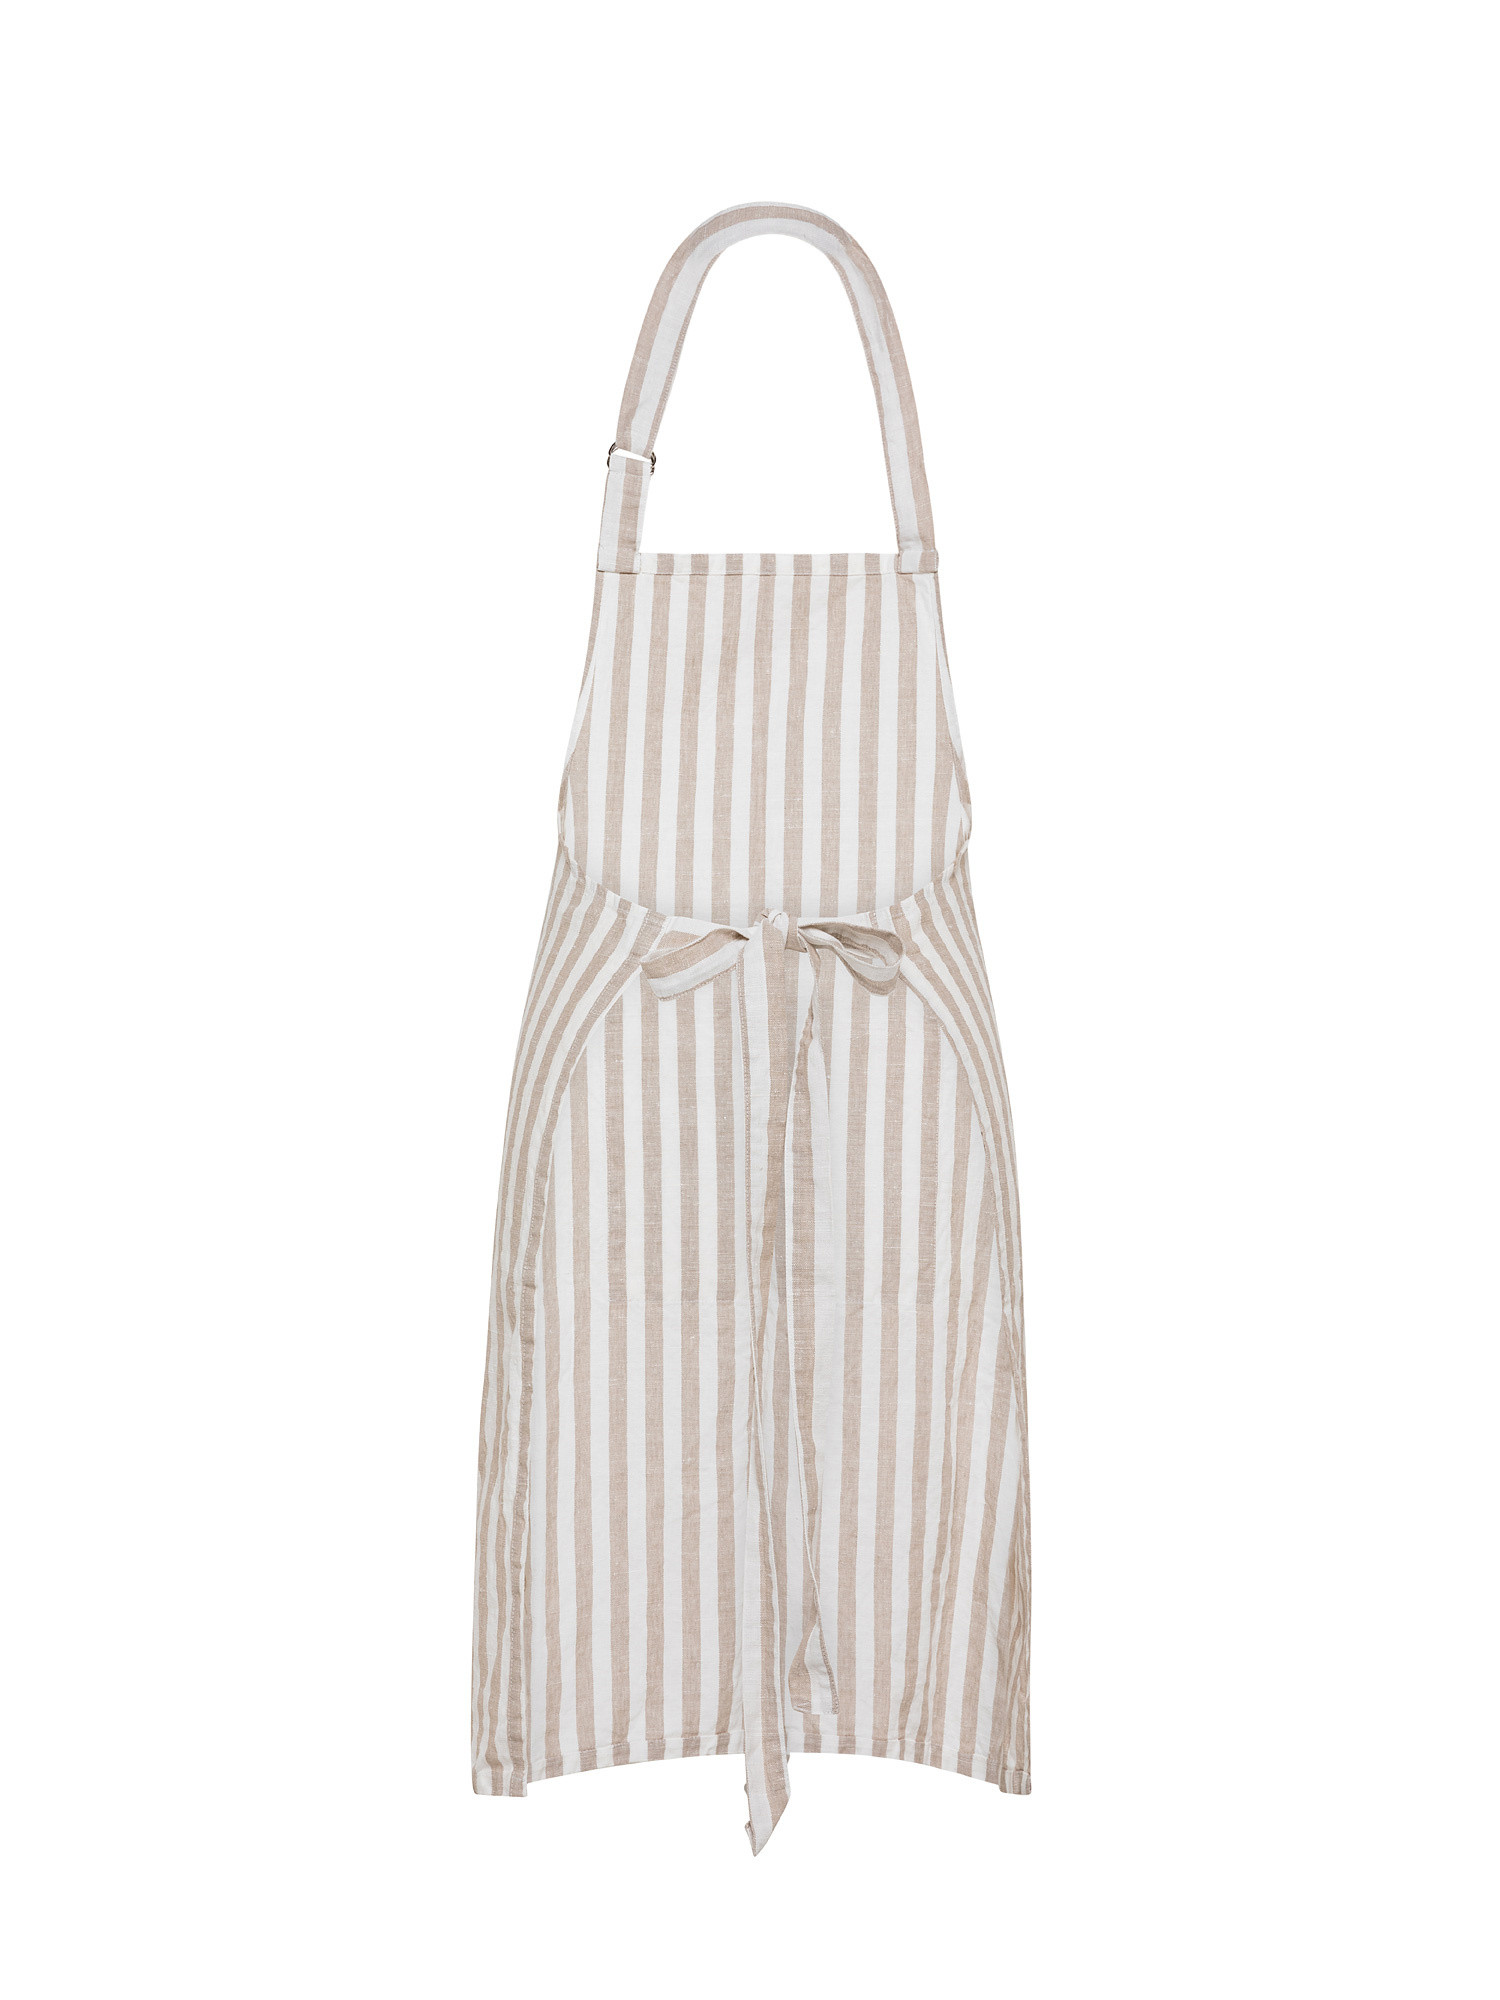 Linen and cotton striped kitchen apron, Beige, large image number 1